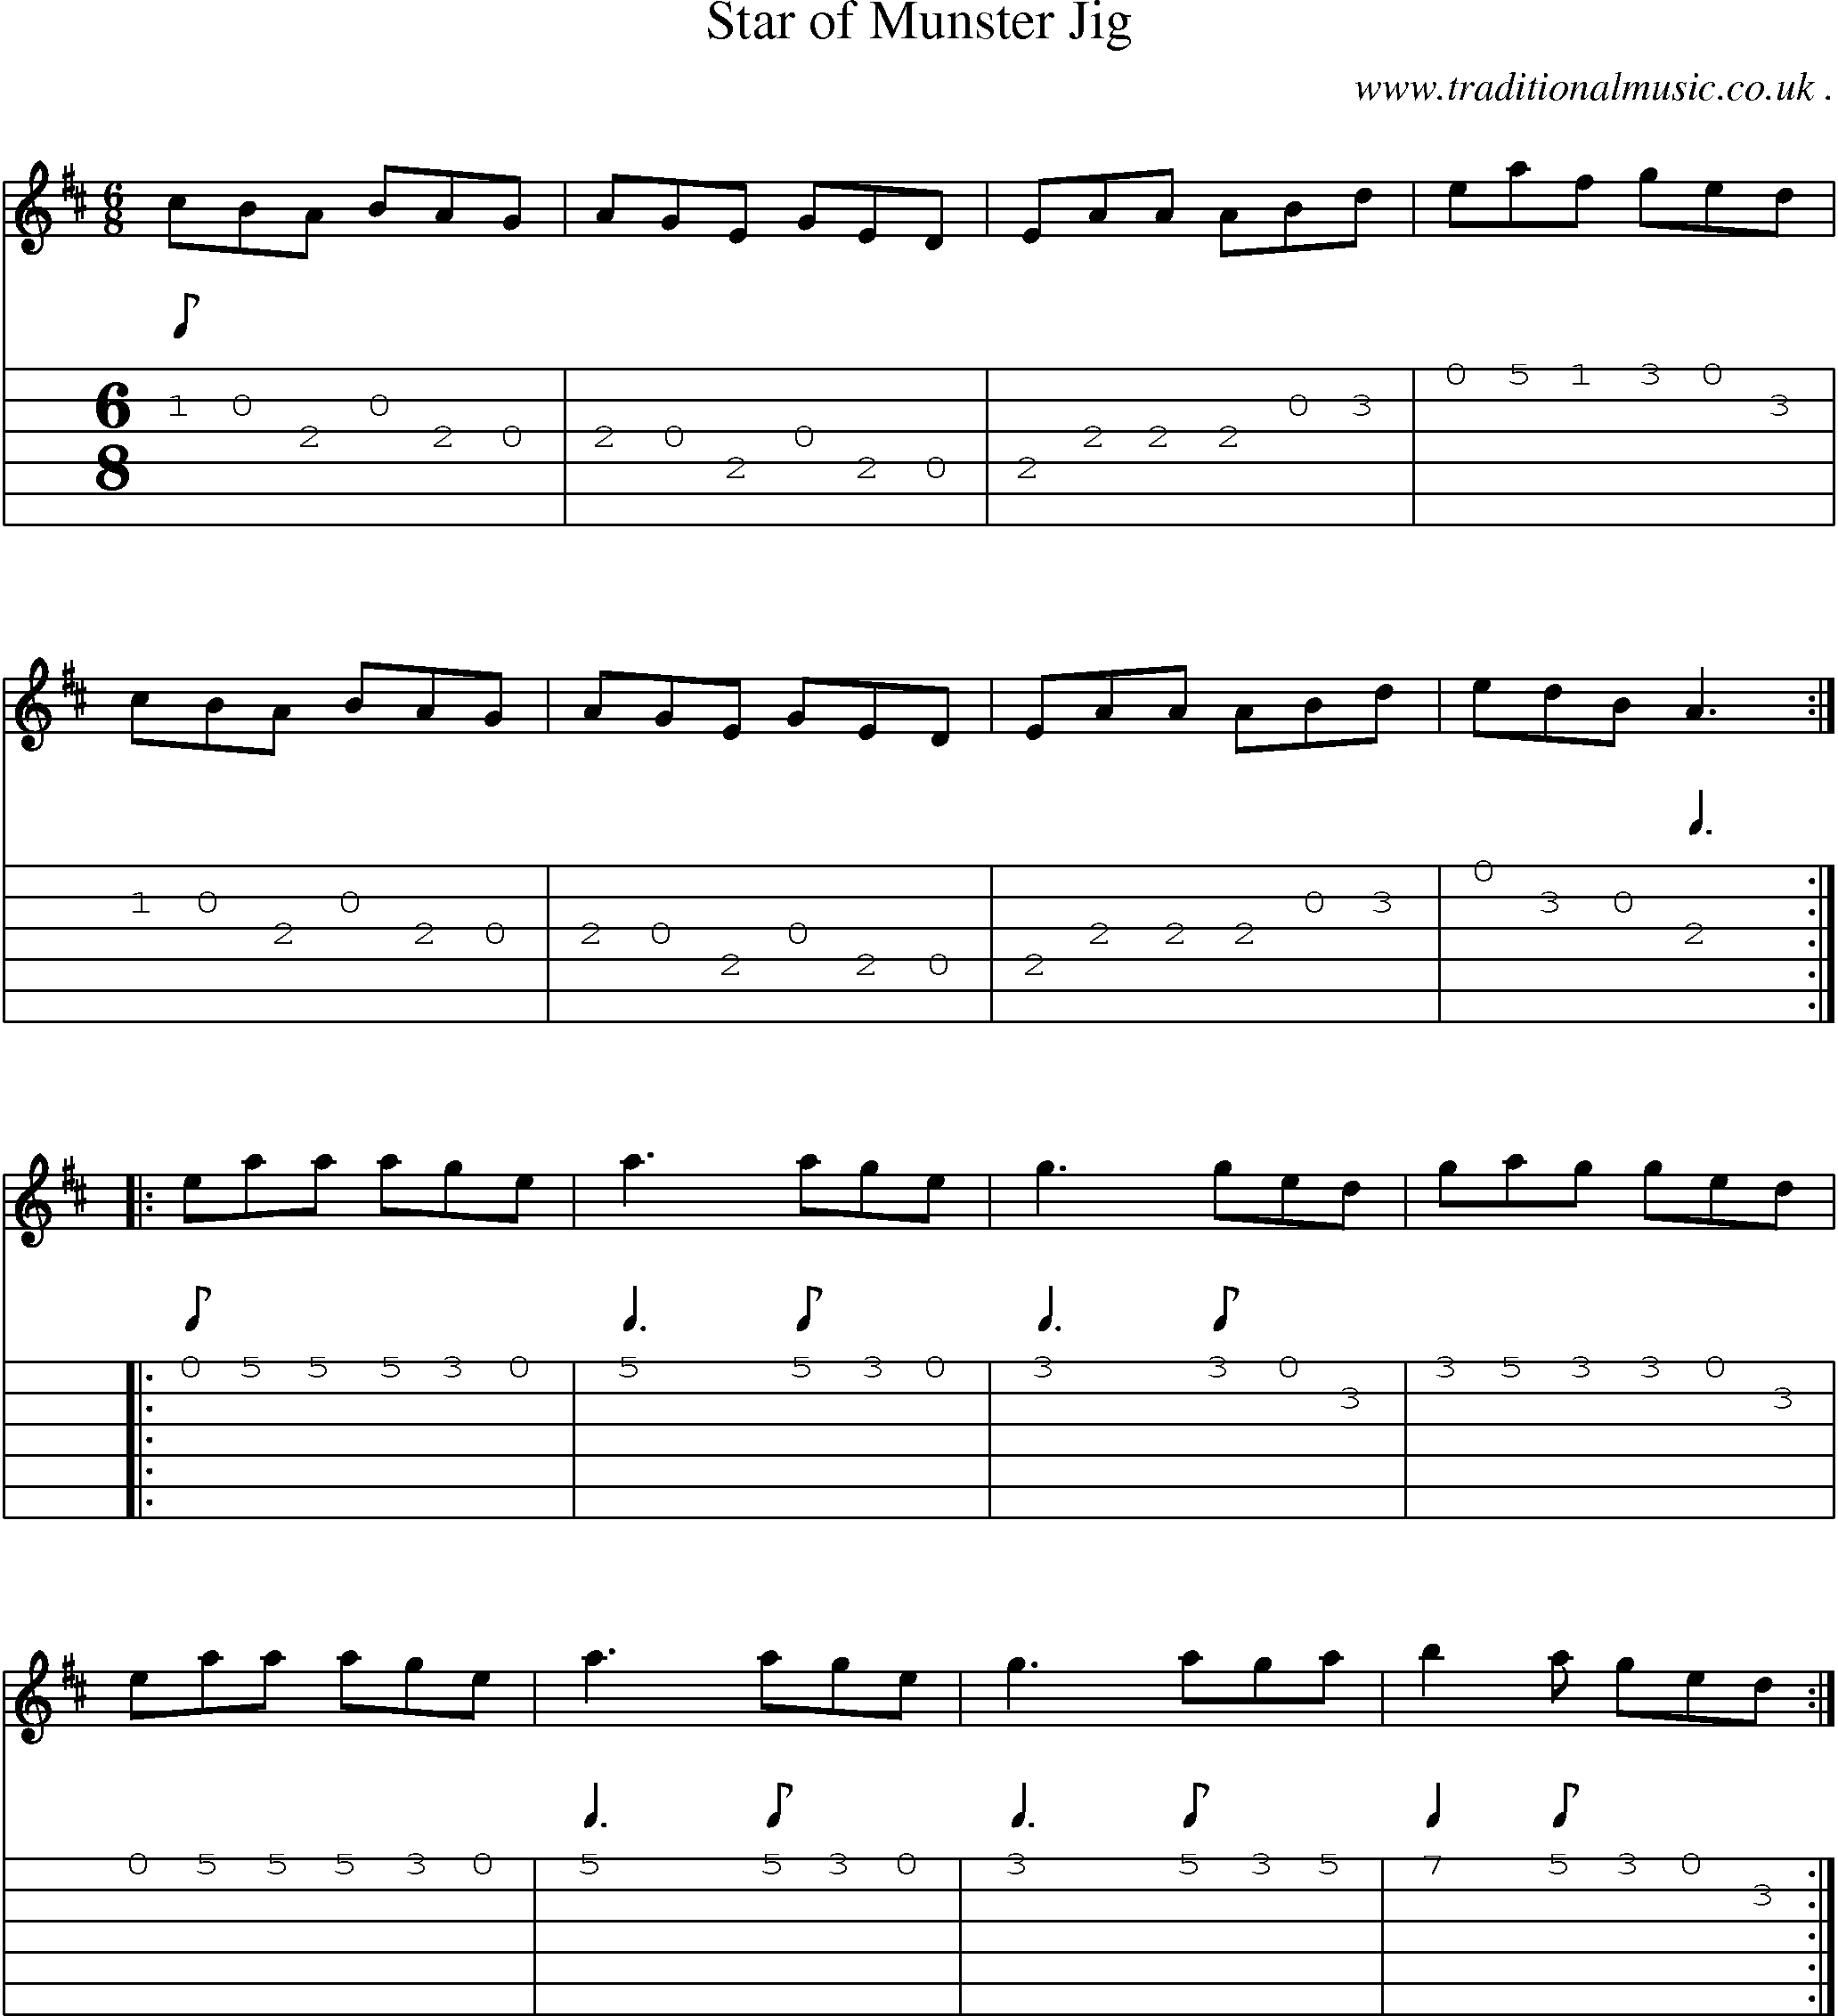 Sheet-Music and Guitar Tabs for Star Of Munster Jig